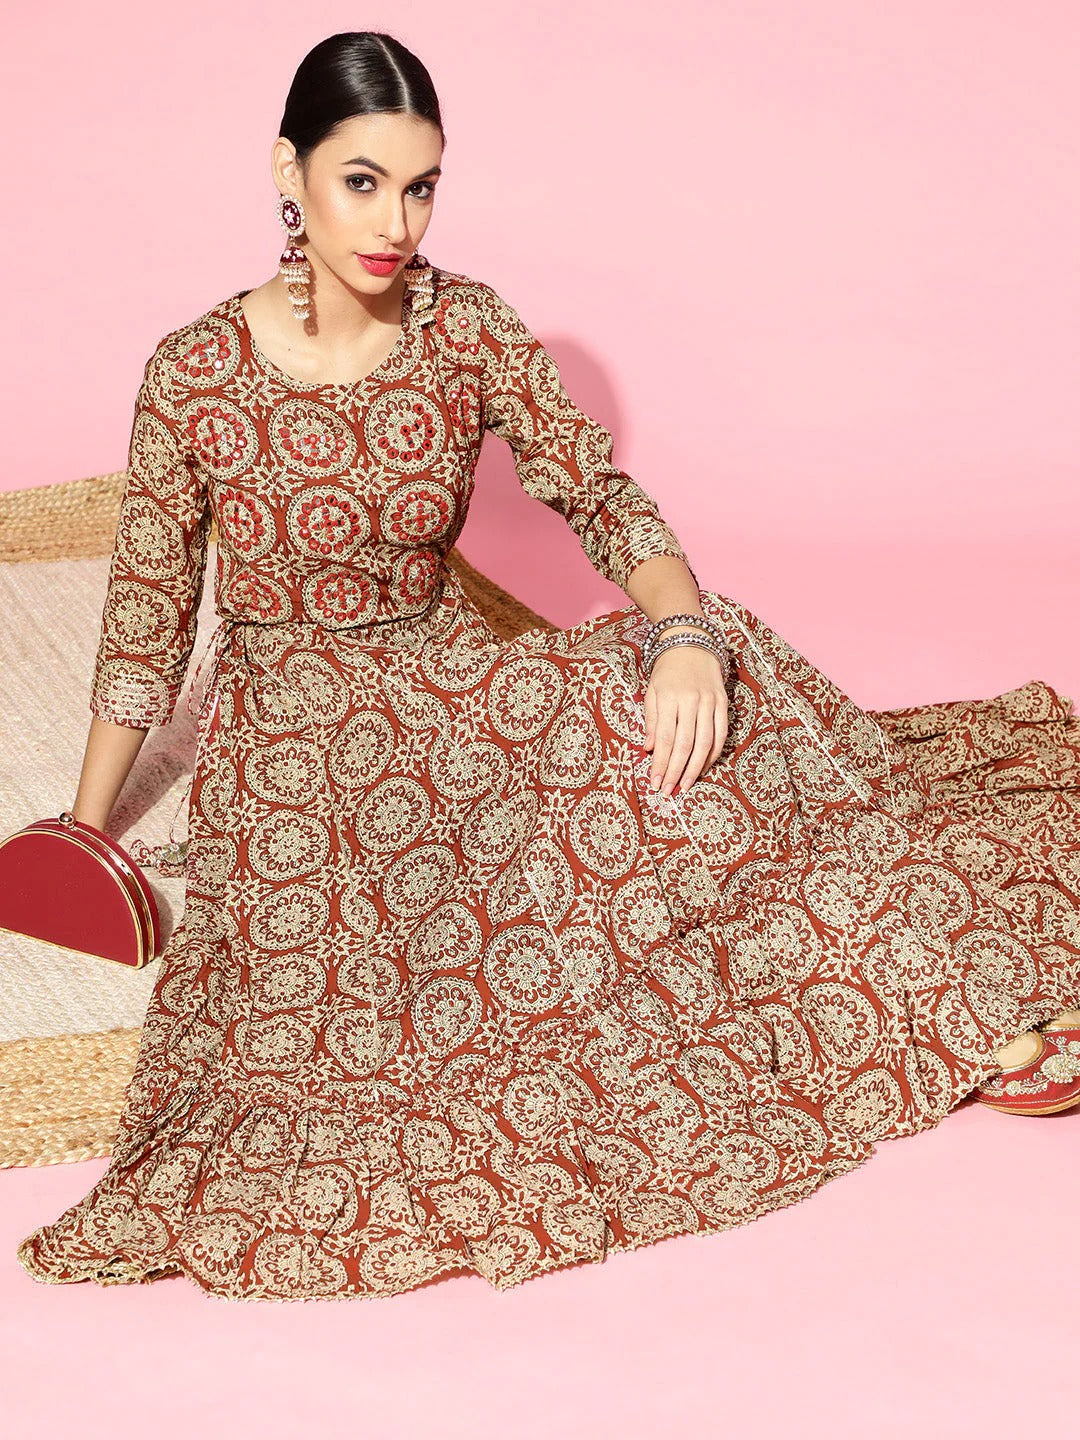 Floral Olive Polyester Kurtas for Women at Soch